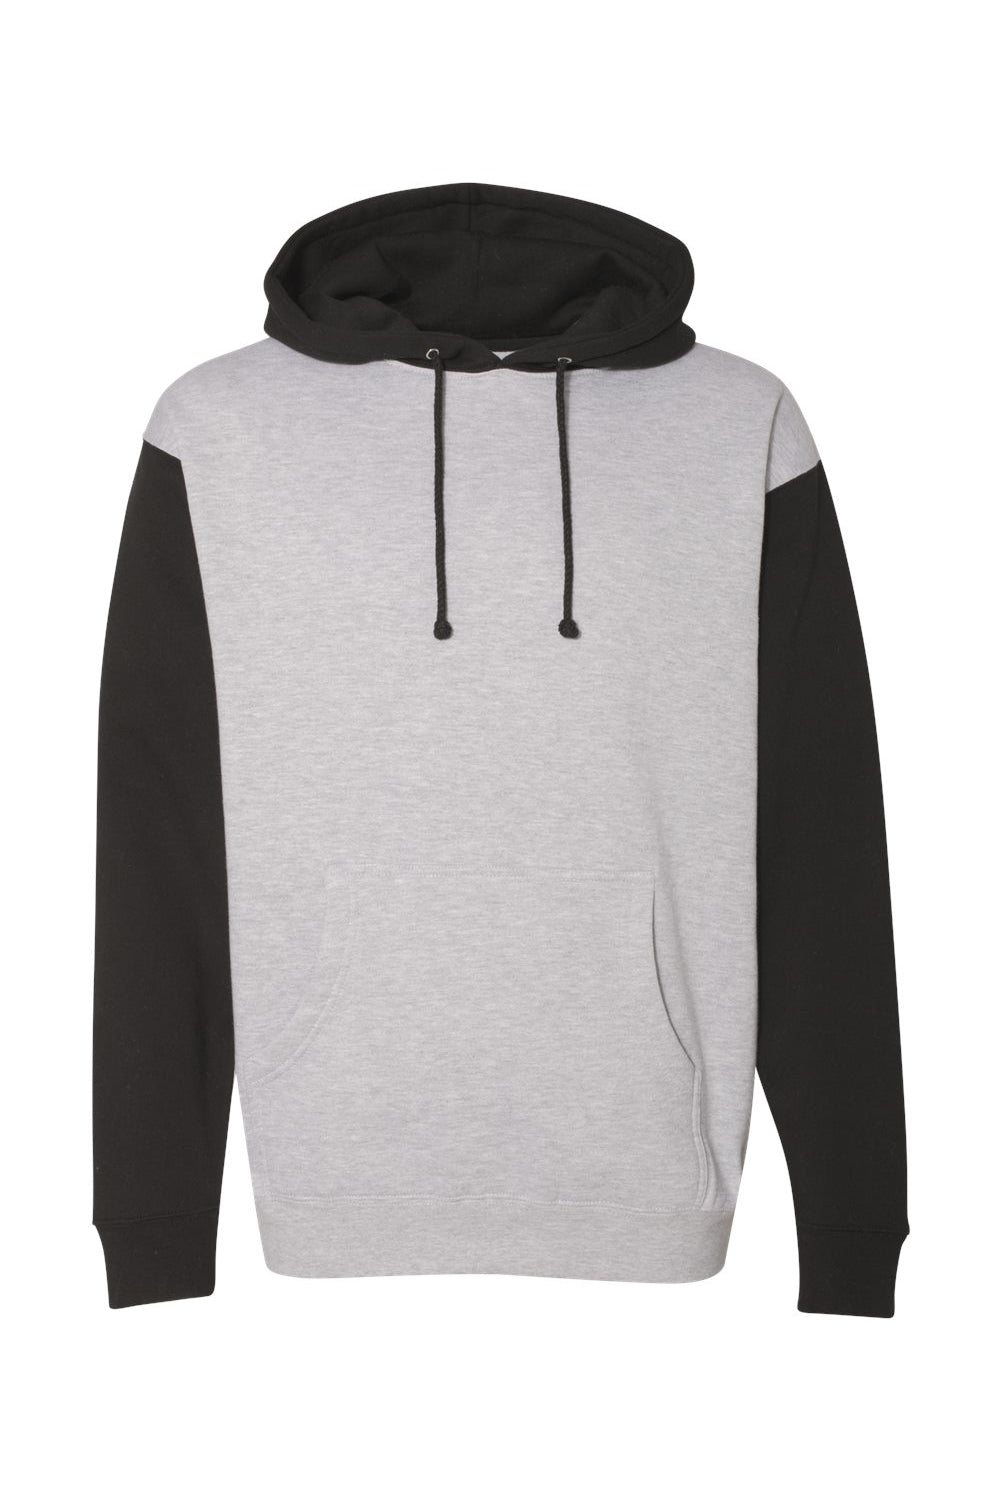 Independent Trading Co. IND4000 Mens Hooded Sweatshirt Hoodie Heather Grey/Black Flat Front